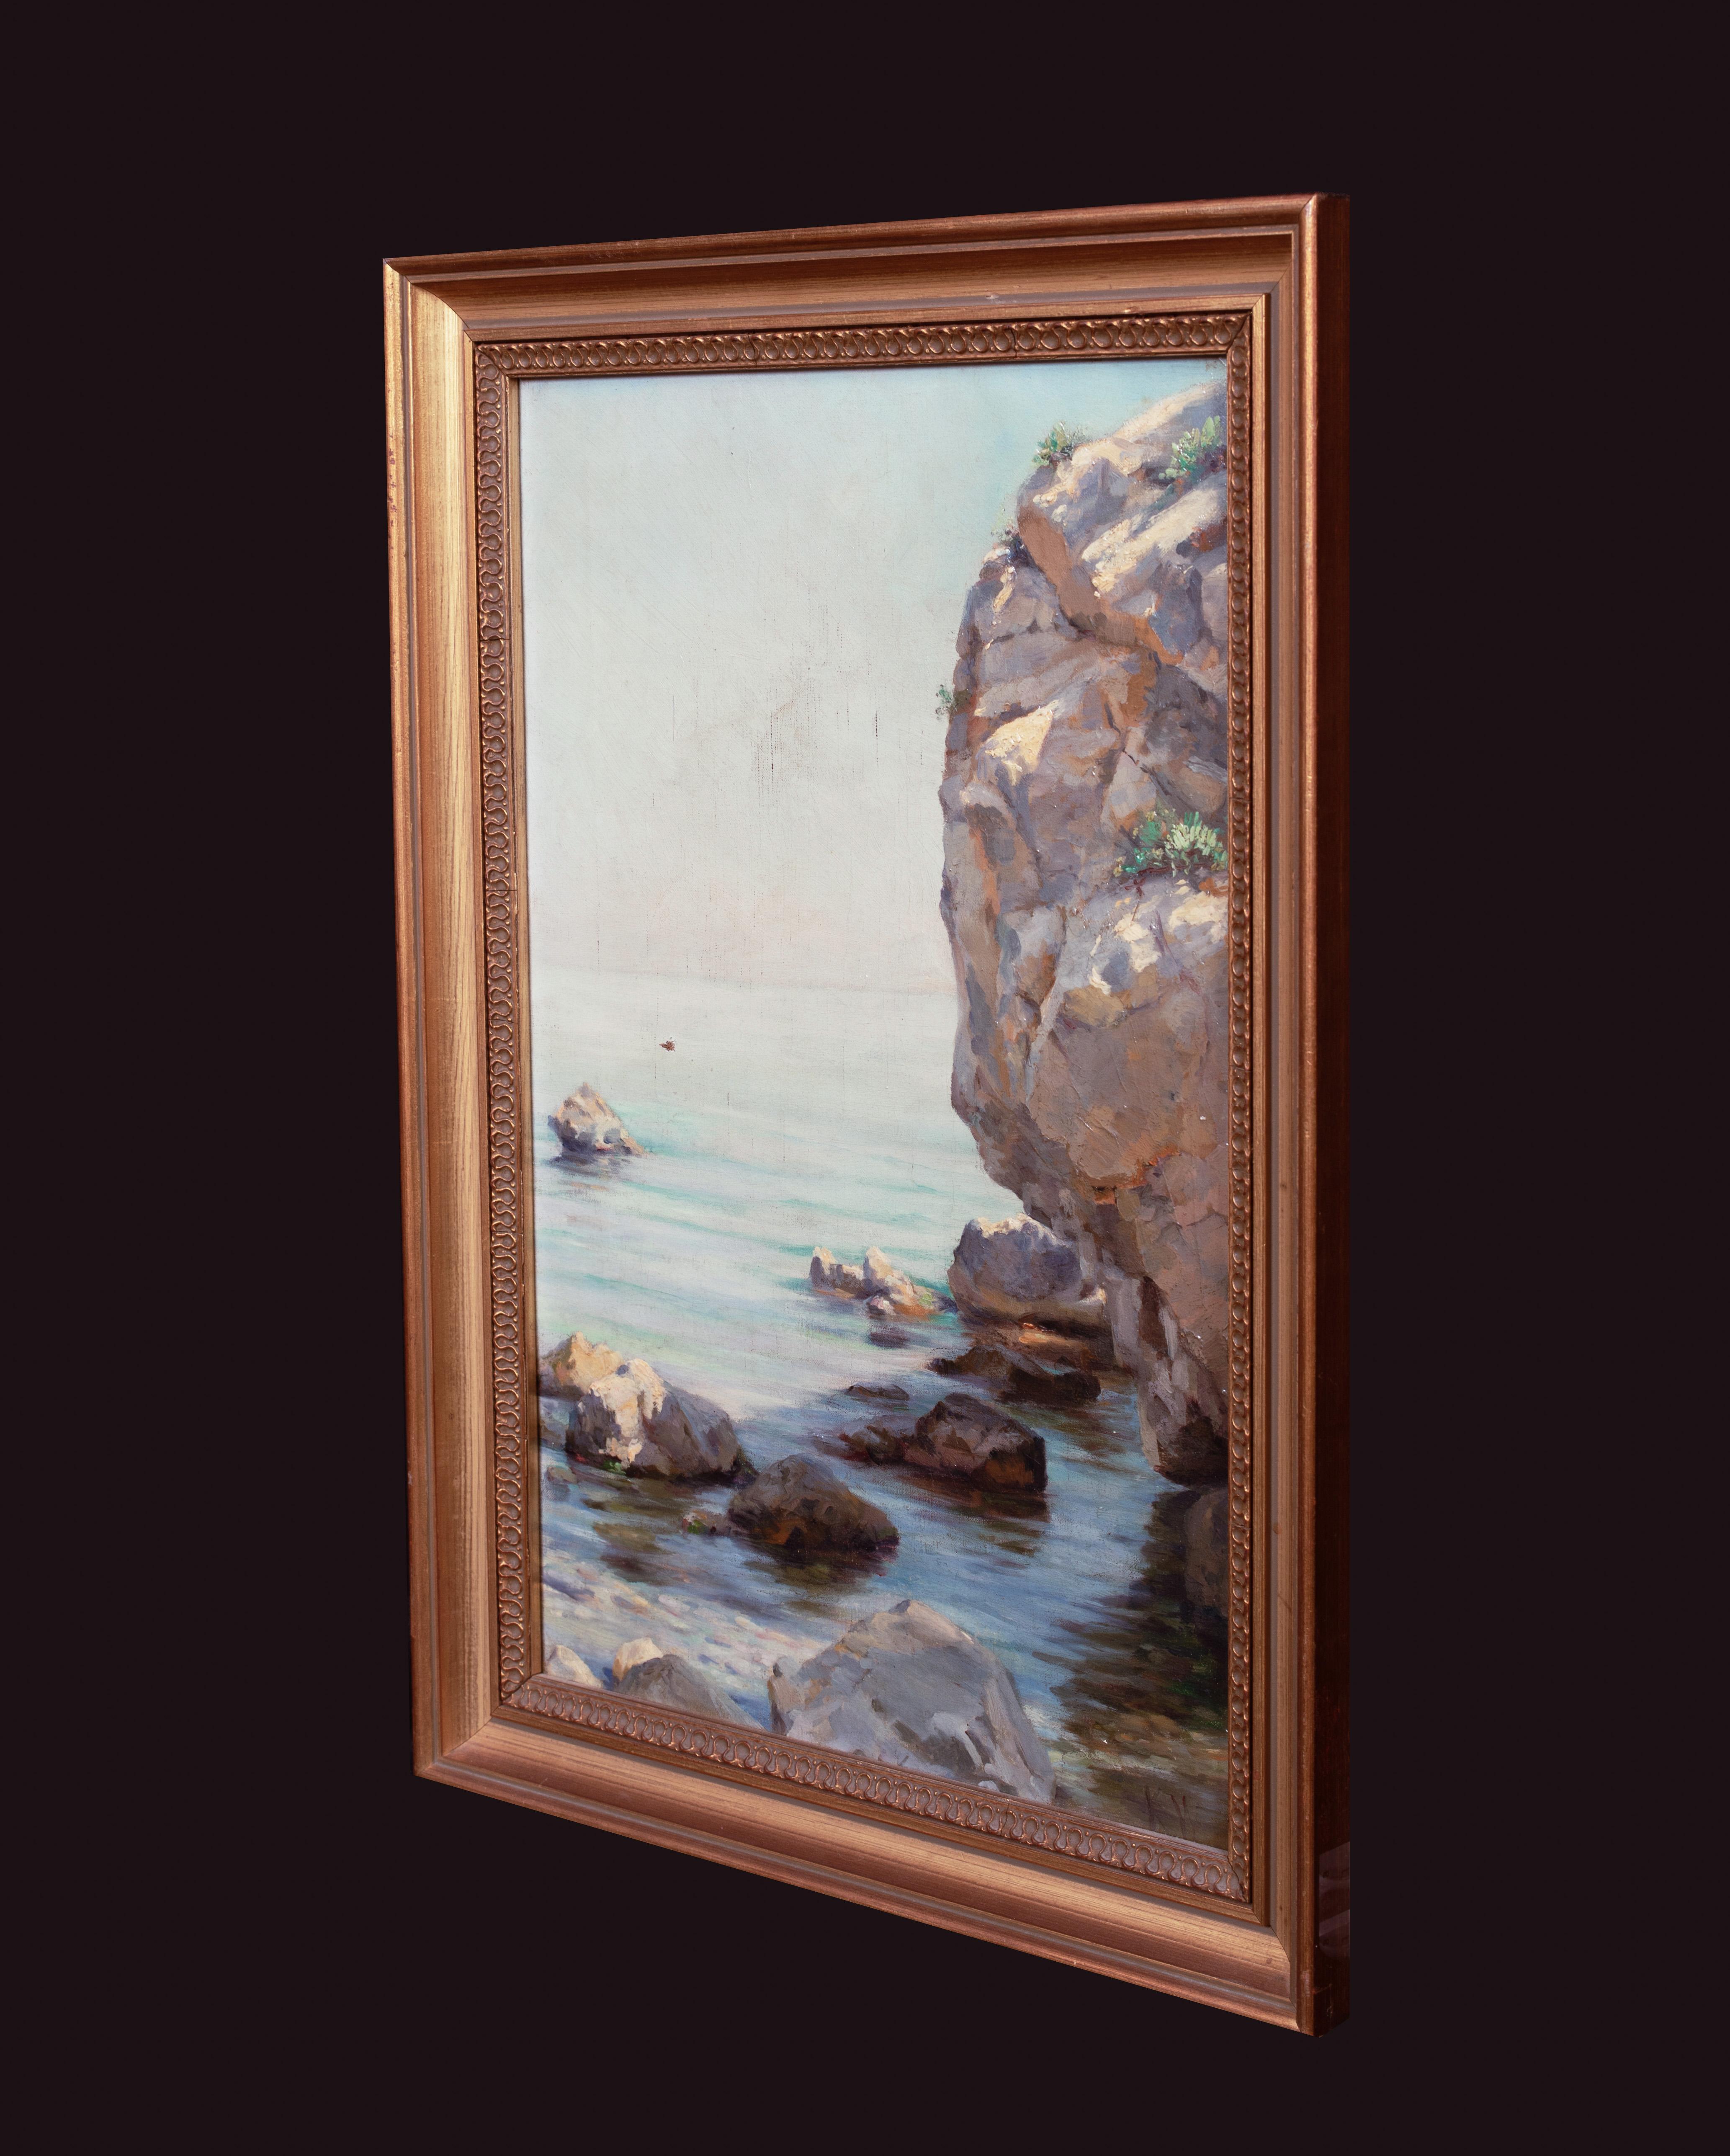 A Rocky Cornish Coast, early 20th Century

by Kathleen Walker (1893-1966) 

early 20th Century study of a rocky Cornish coast by Kathleen Walker, oil on canvas. Good quality and condition apart from one small perforation. Monogrammed and